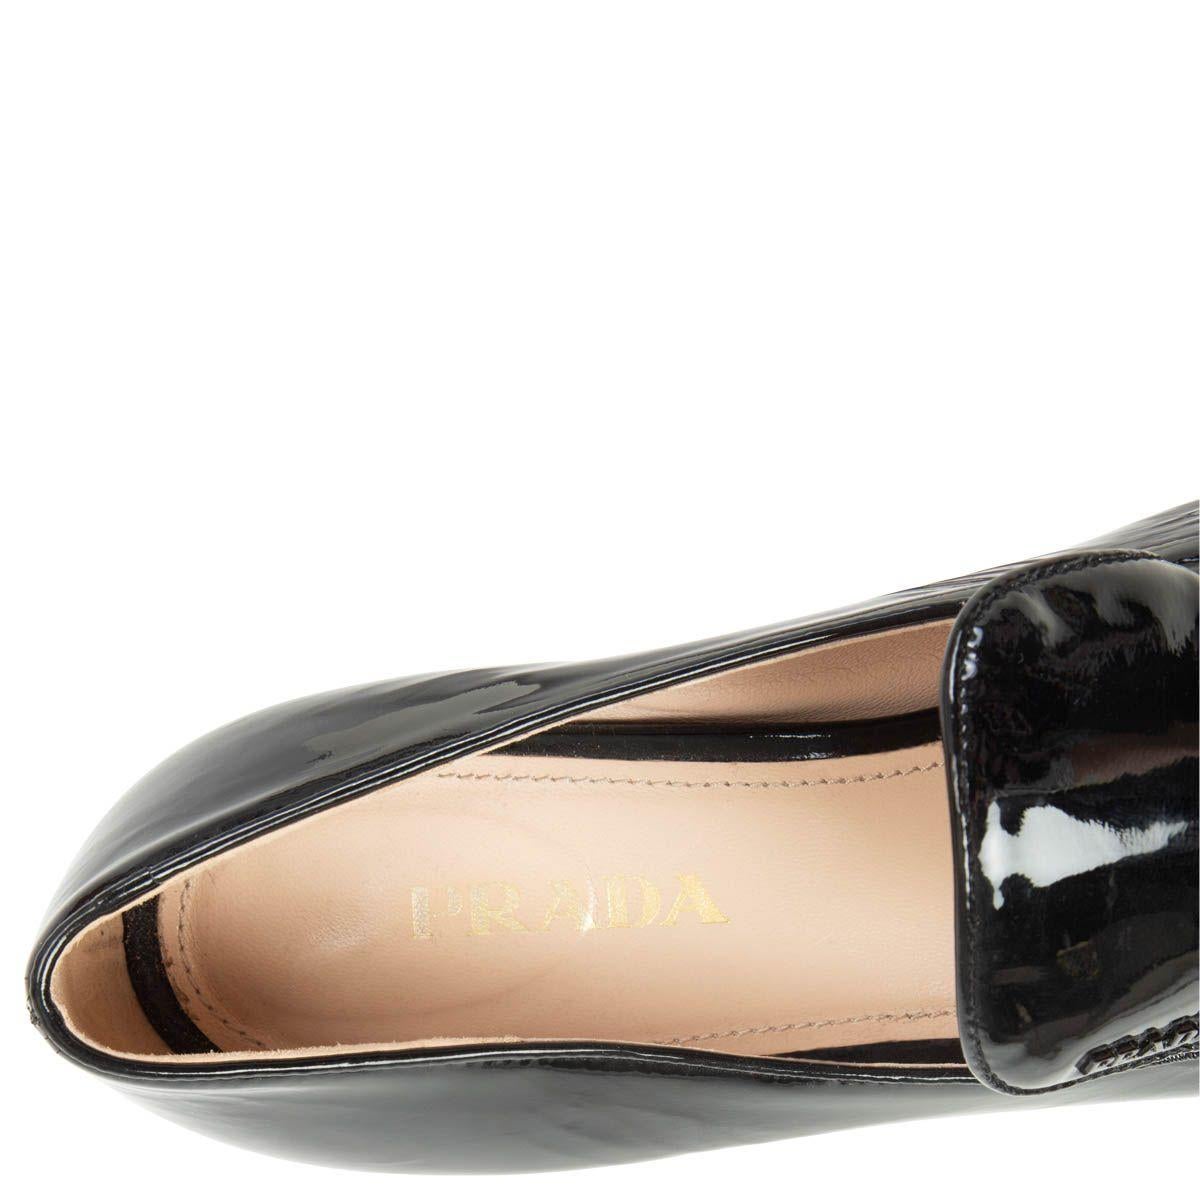 Black PRADA black patent leather Loafers Shoes 39.5 For Sale